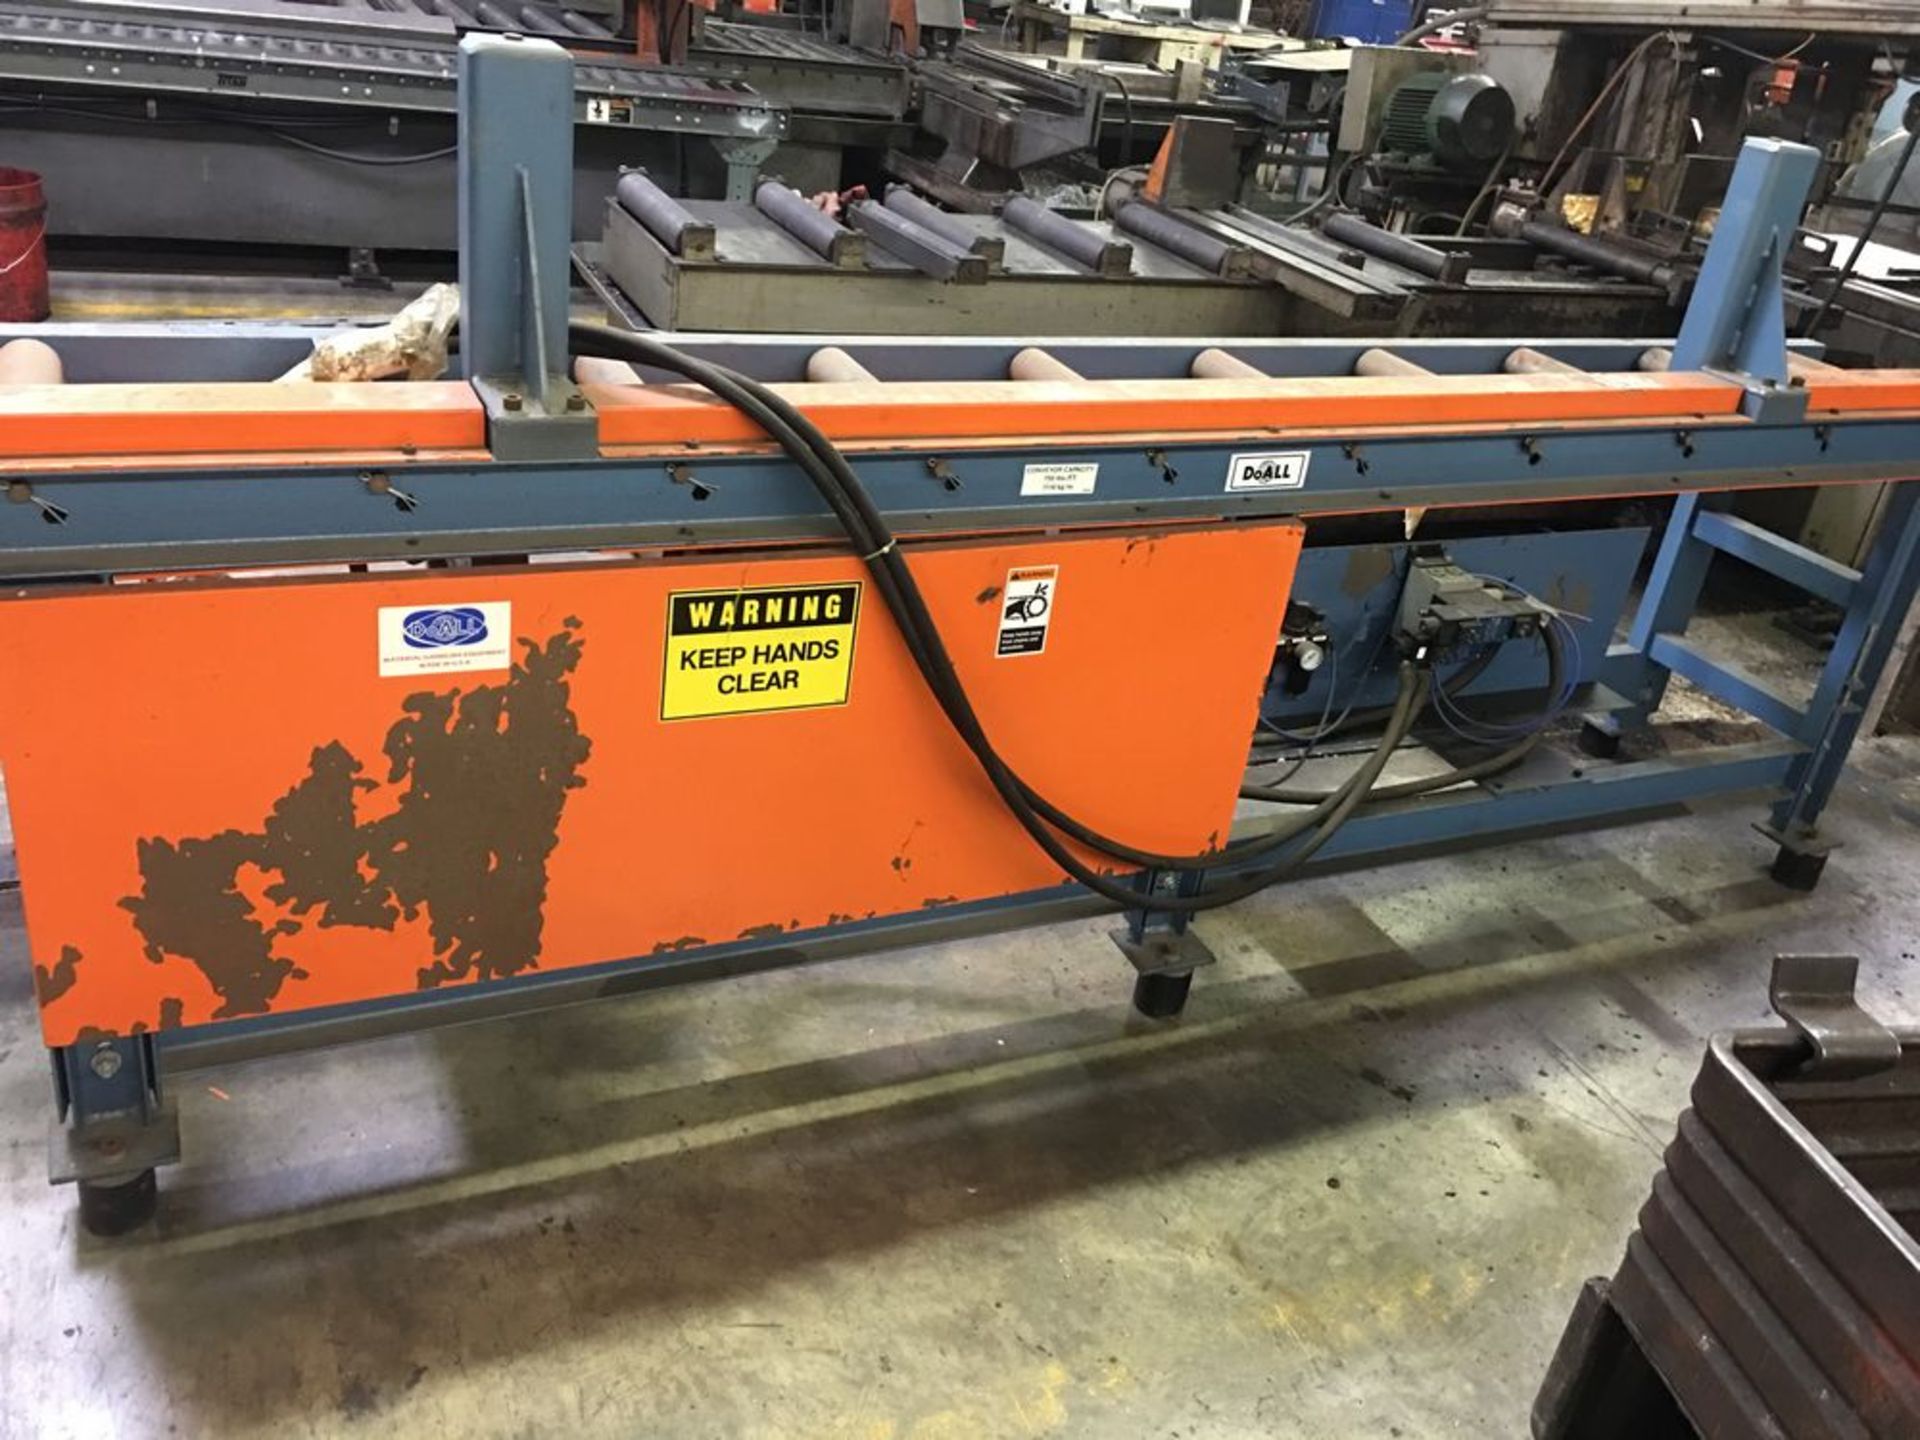 DoAll Automatic Band Saw with Auto Bundle Loader Model C3350NC, S/N 566-08135R1, NEW 2013 - Image 14 of 15